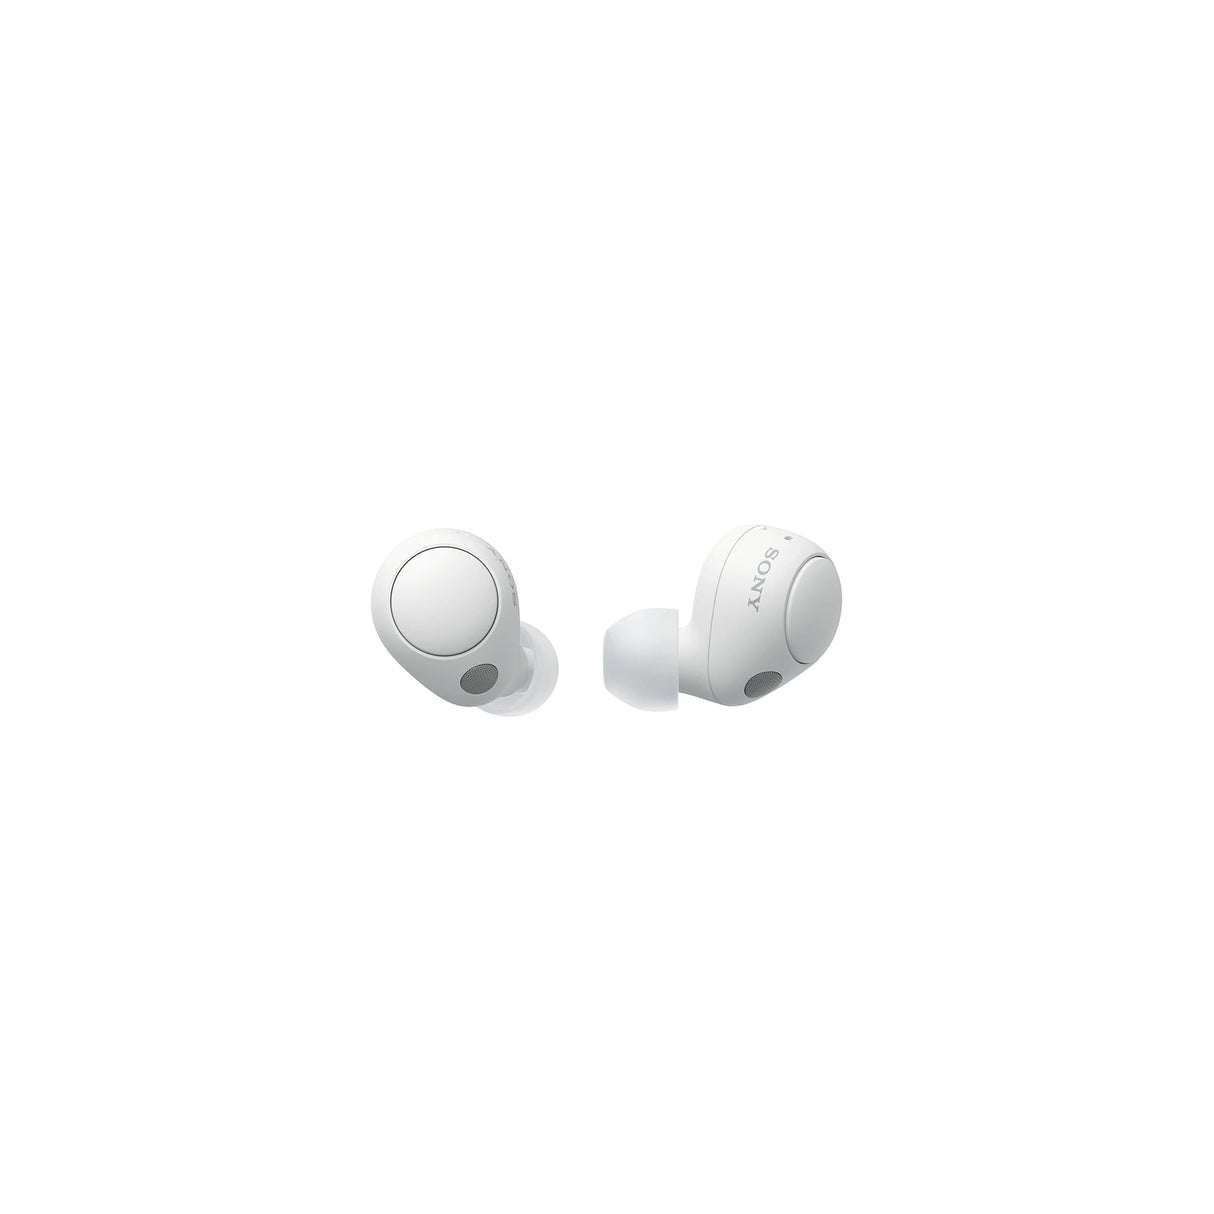 Sony WF-C700N - Lightest Truly Wireless Noise Cancellation Earphones (White)